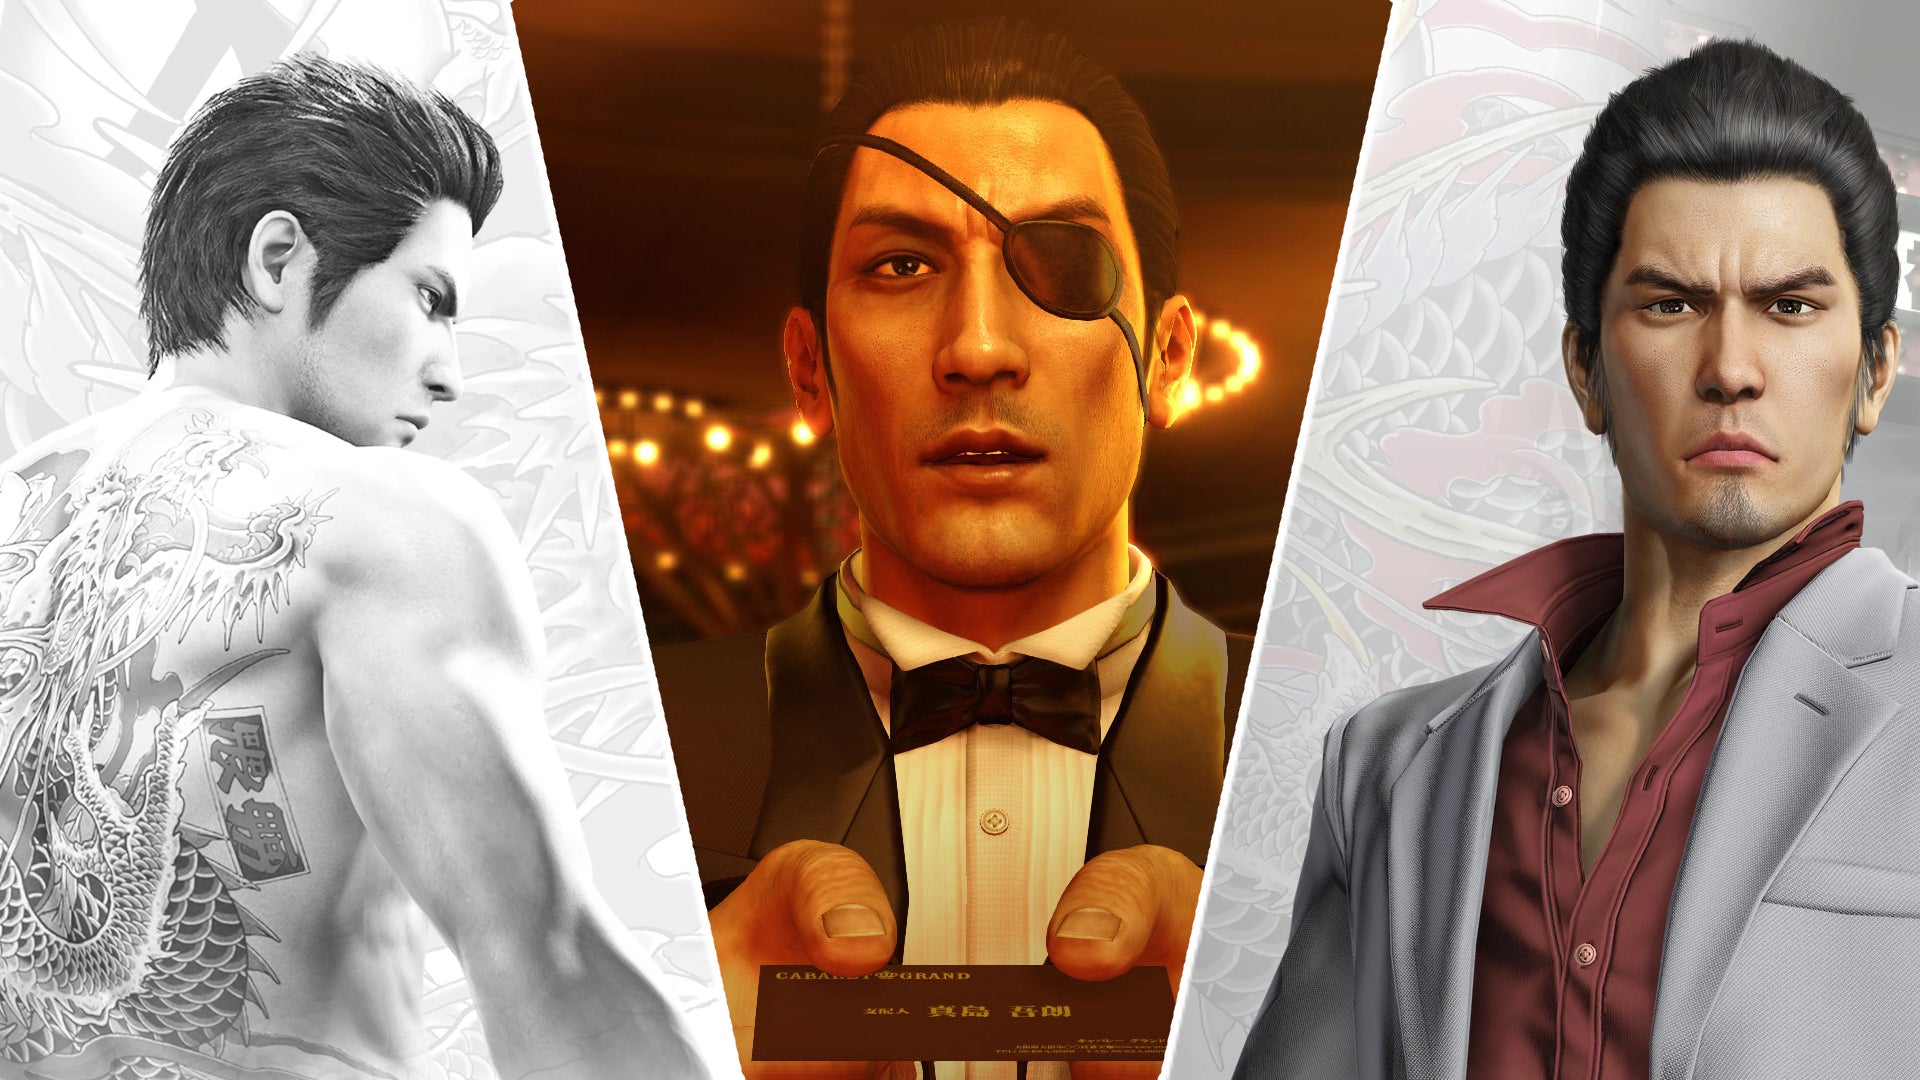 Image for Yakuza 0, Kiwami, and Kiwami 2 are back on Game Pass, and there's never been a better time to start the series